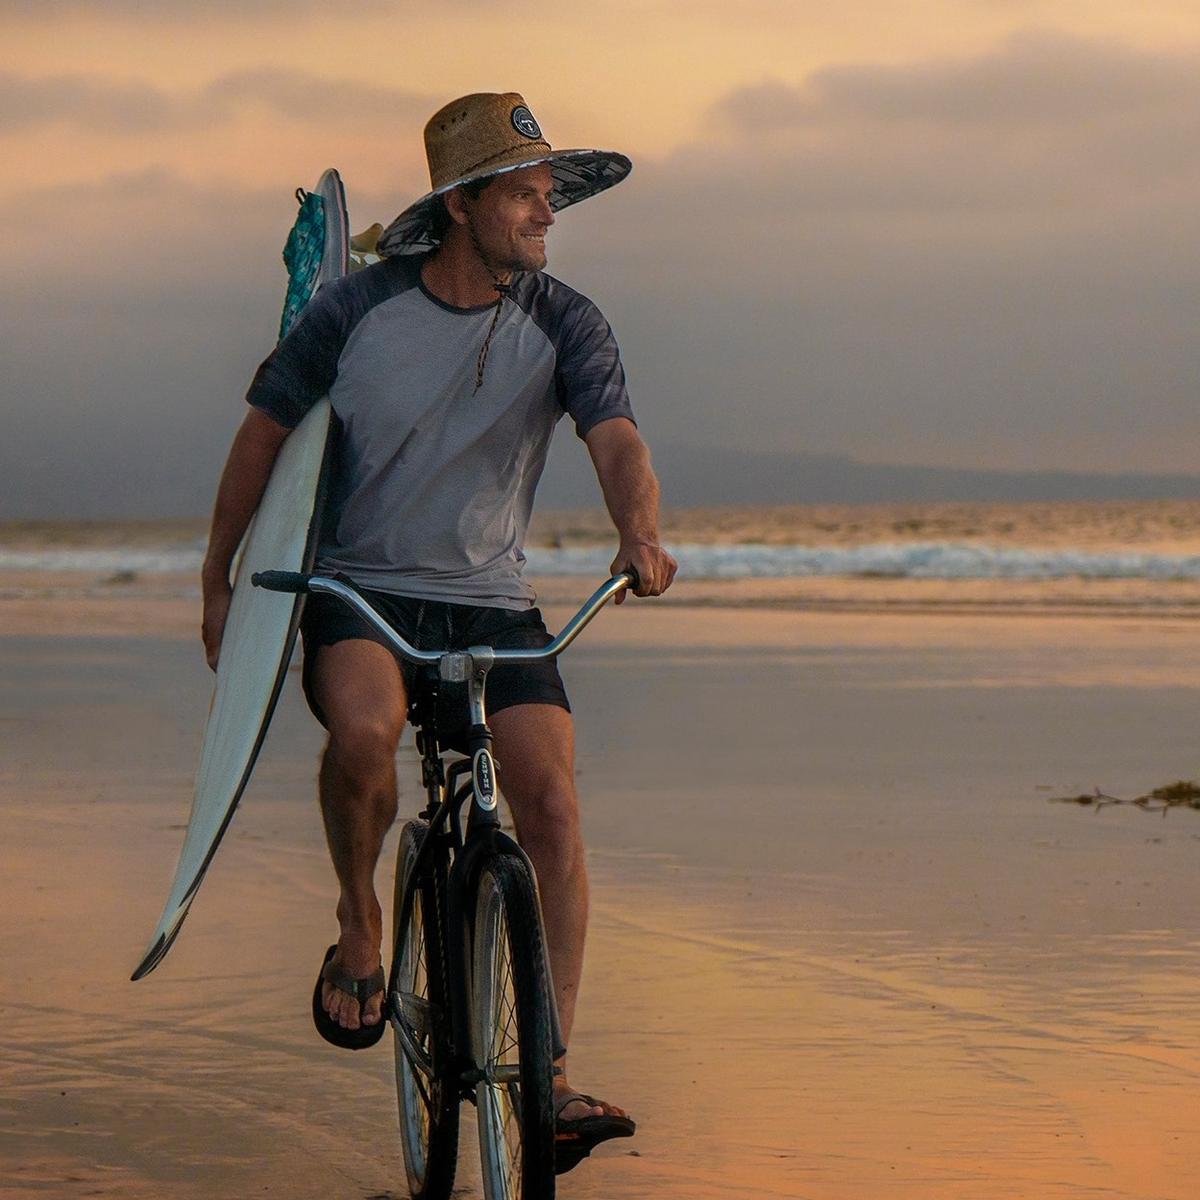 Photo of Fred Pompermayer enjoying a ride along the beach. (Courtesy of <a href="https://www.instagram.com/fred_pompermayer/">Fred Pompermayer</a>)